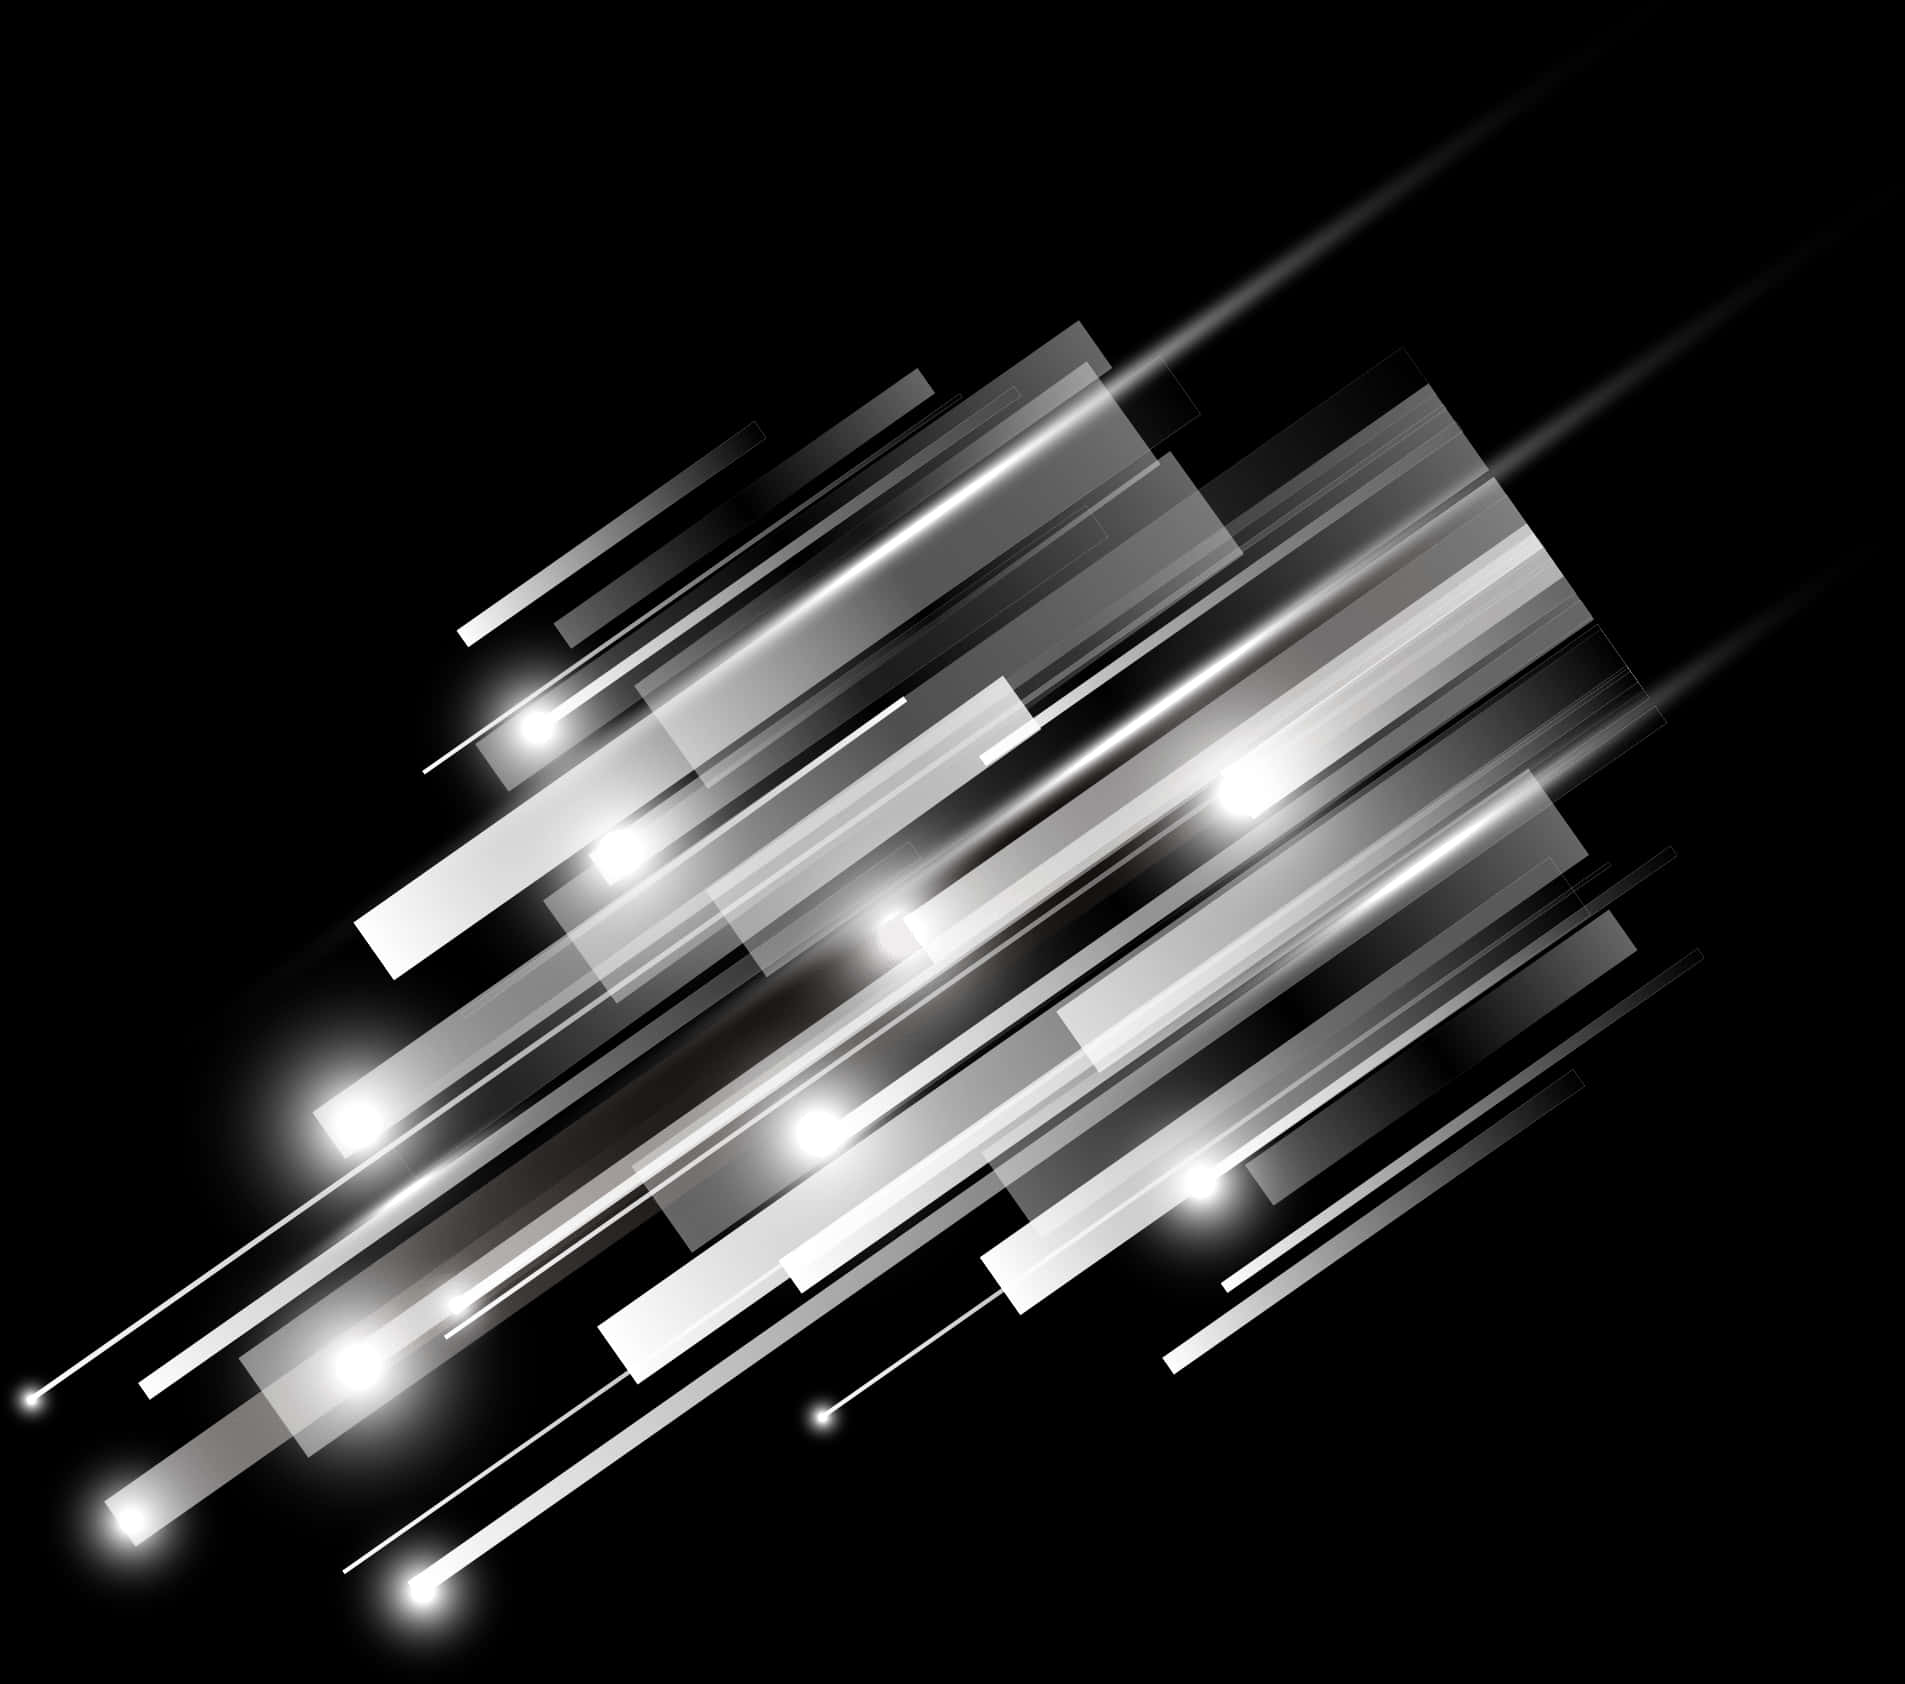 A Black And White Image Of Lines And Lights